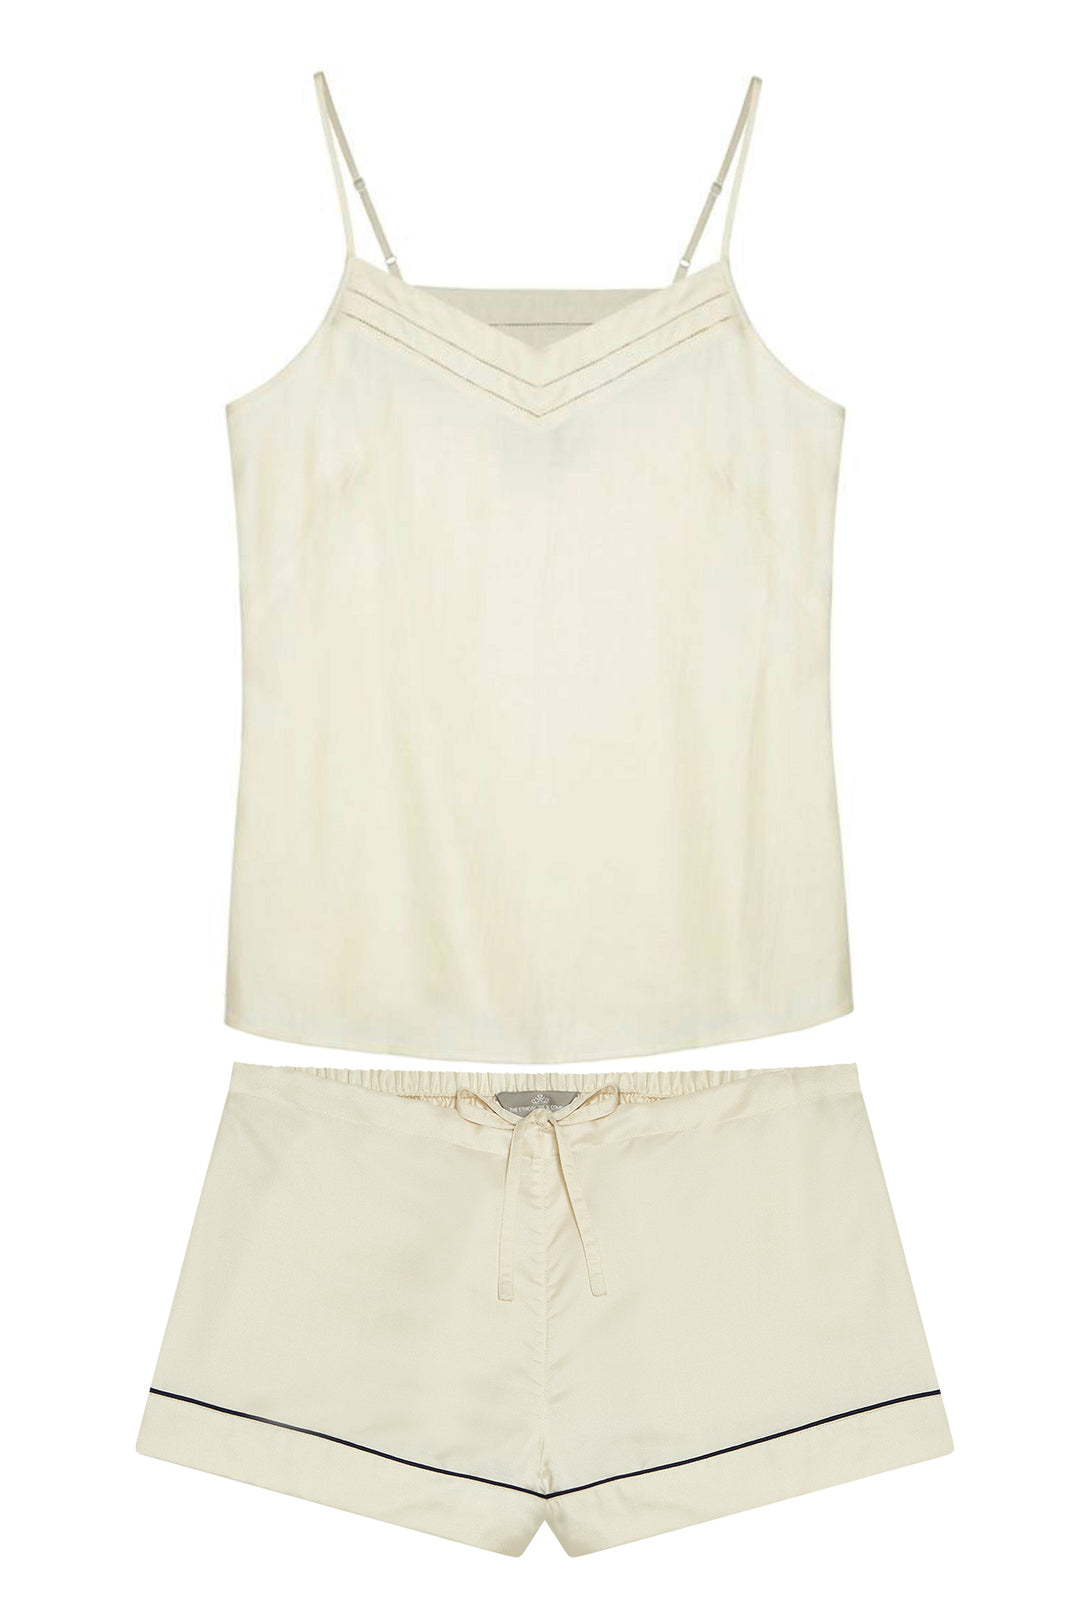 Mulberry Silk Camisole & Shorts Set - Ivory (Natural) with navy piping